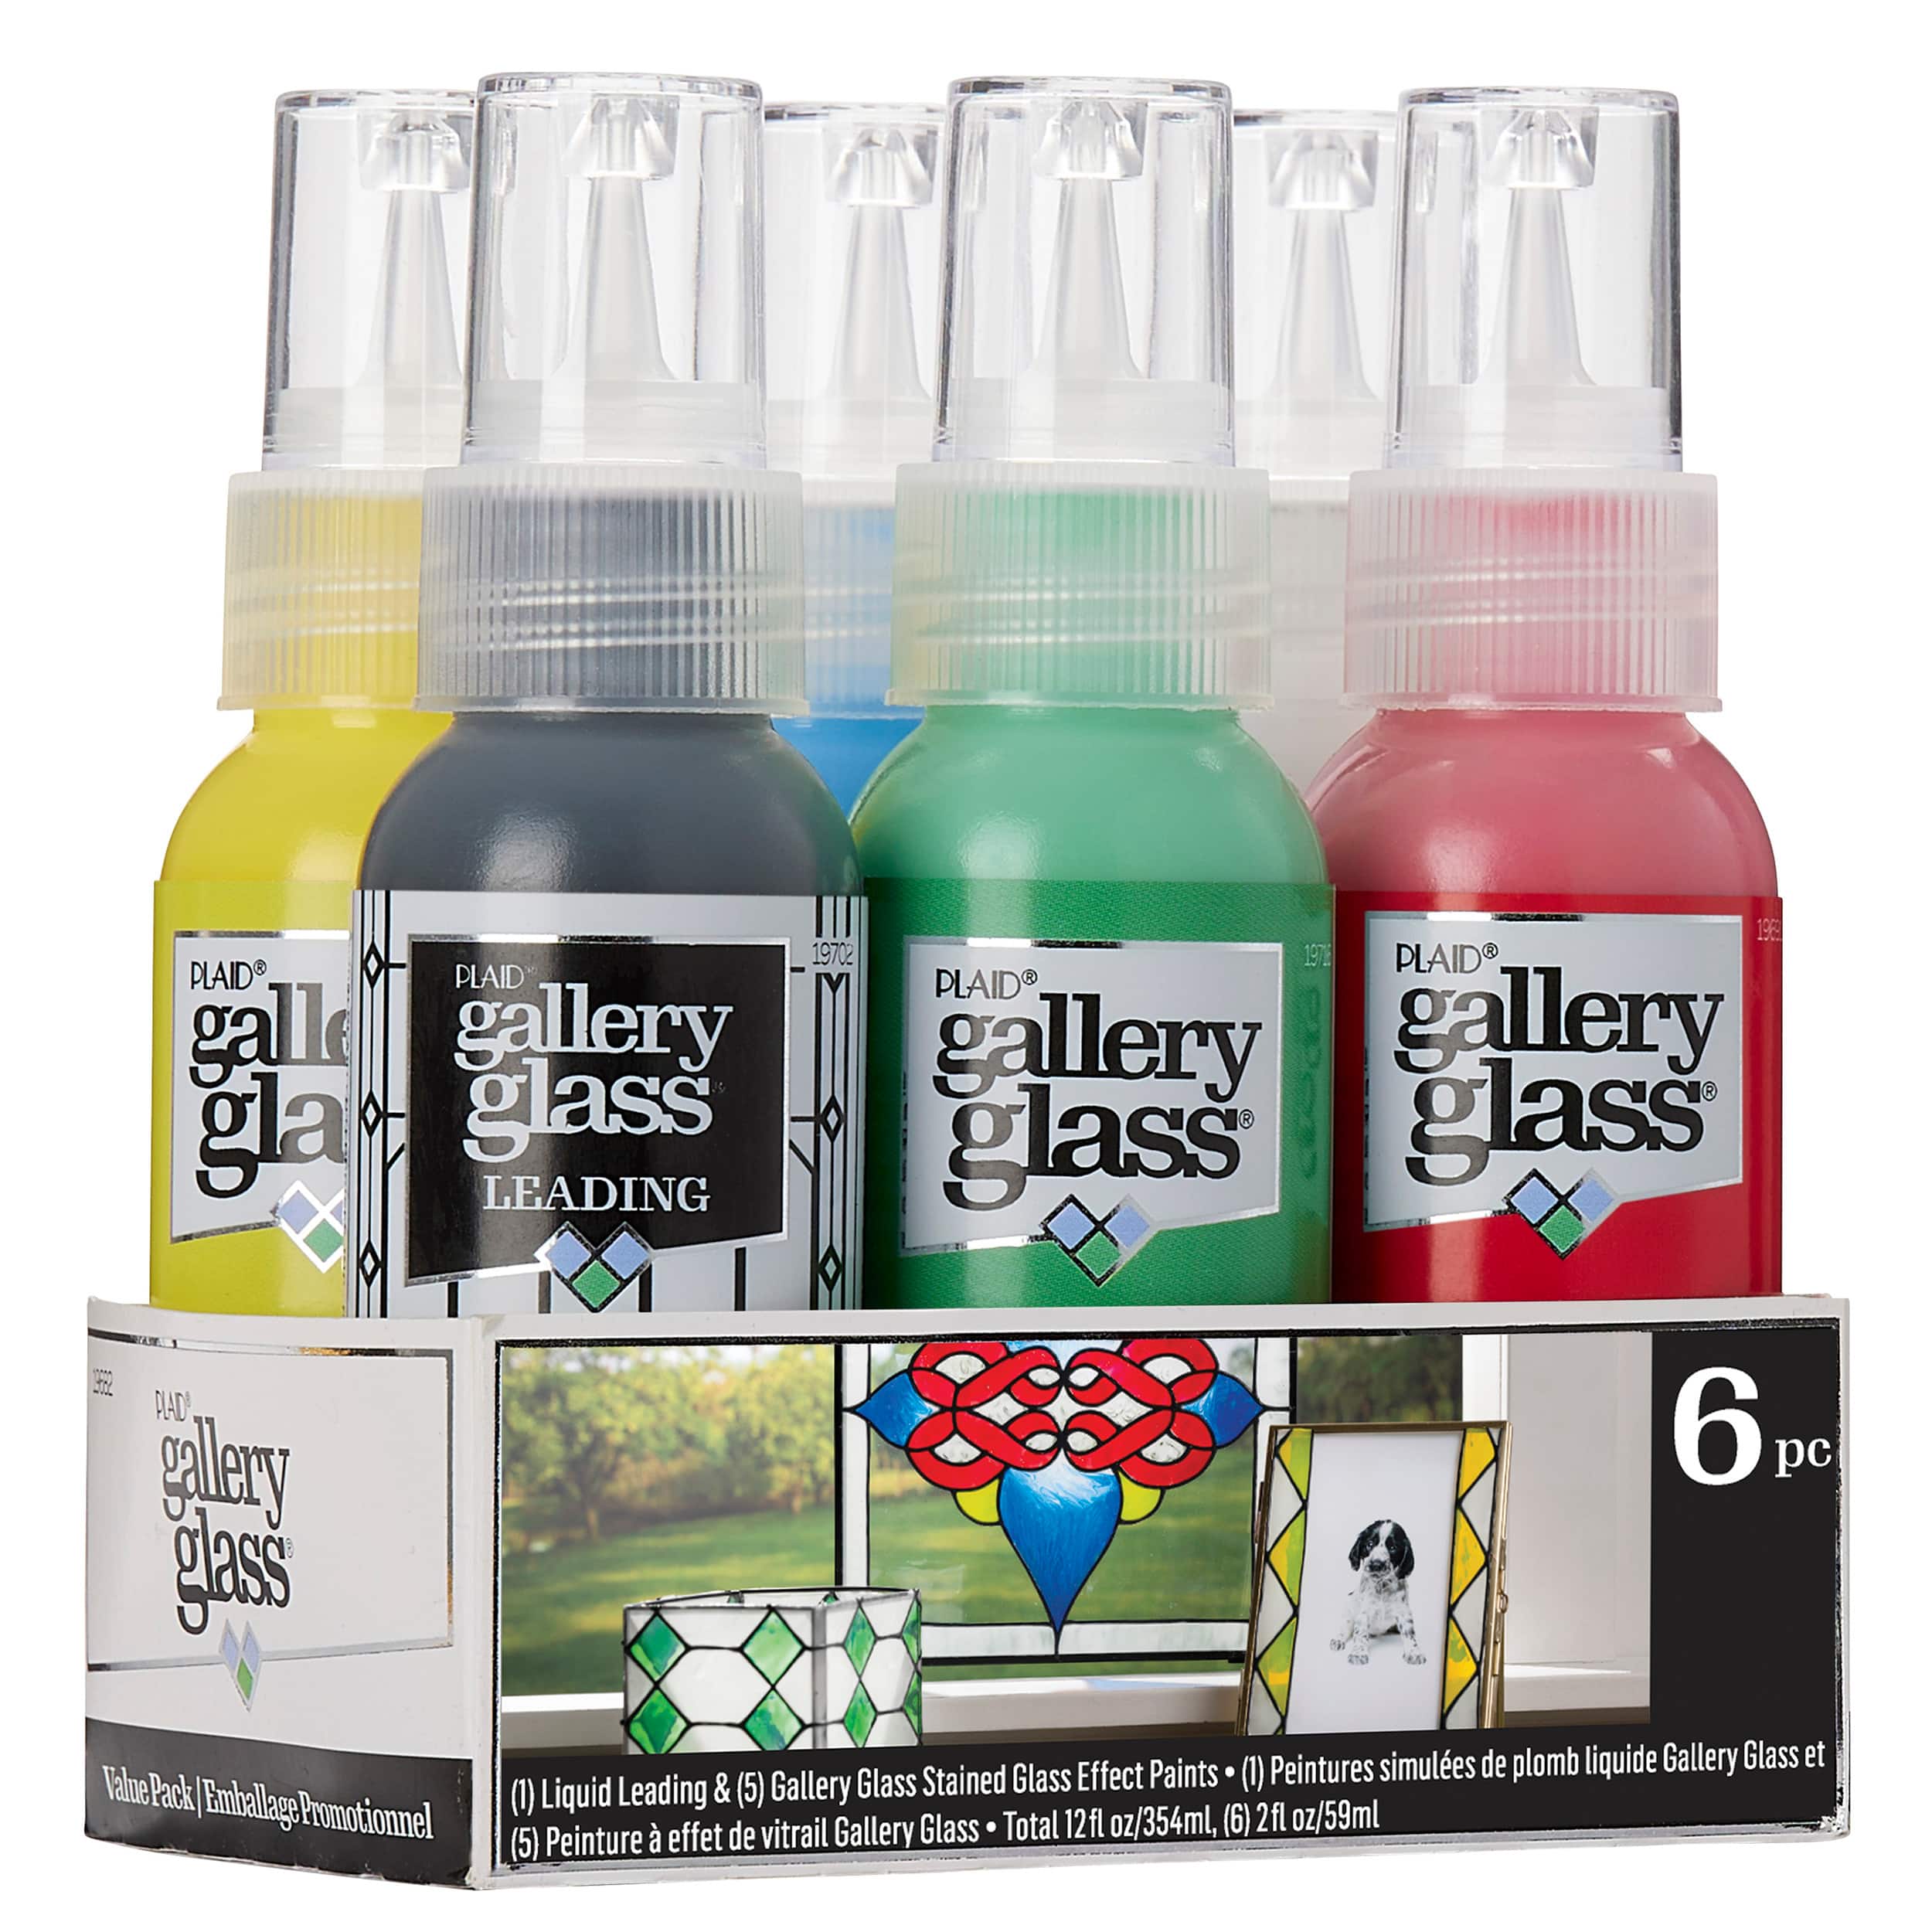 Frost Gallery Glass Stained Glass Paint, Hobby Lobby